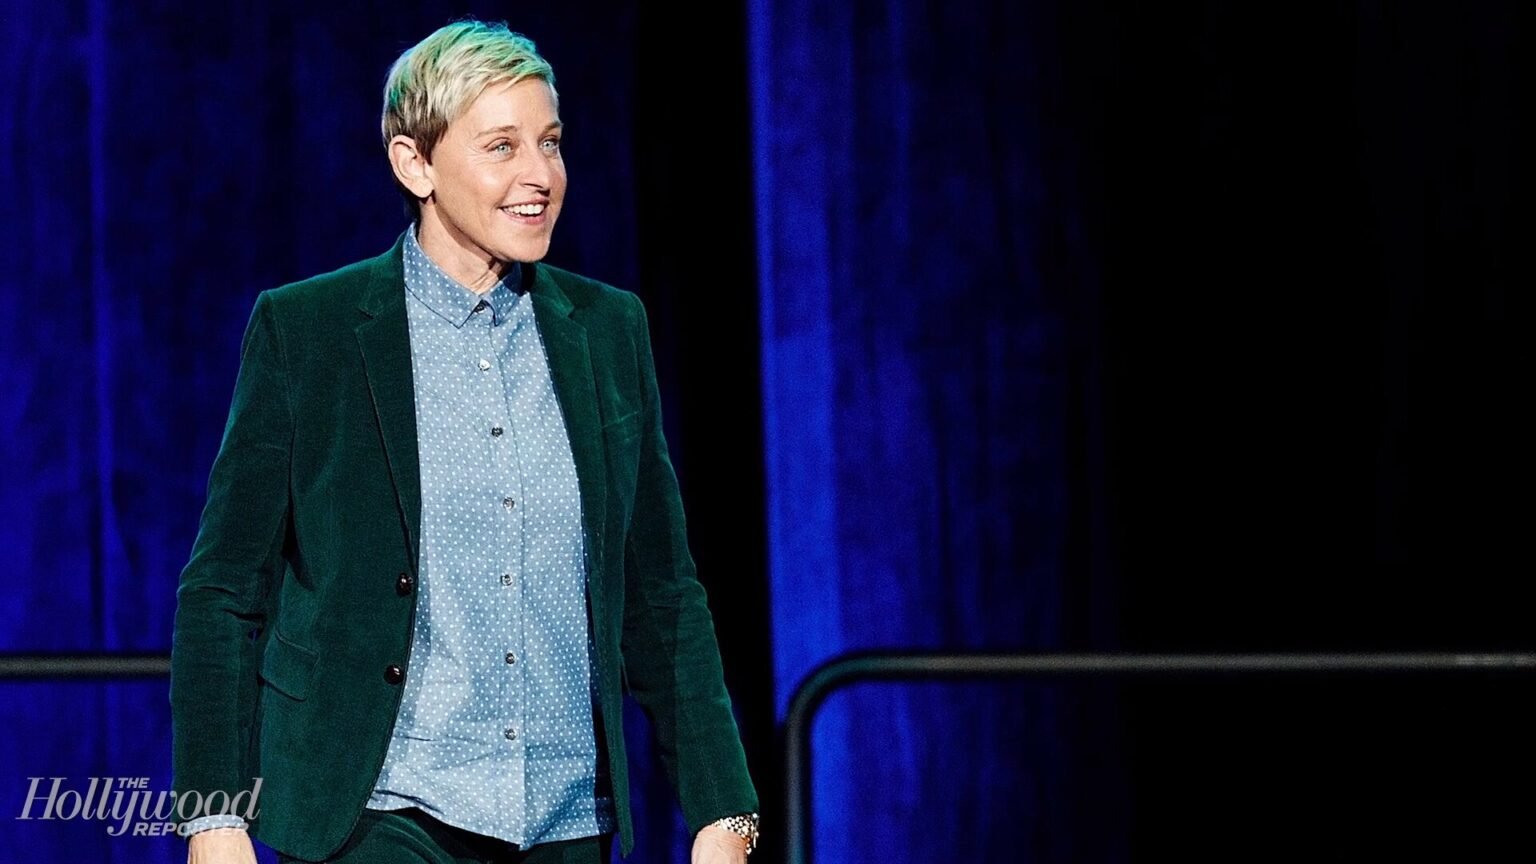 Ellen DeGeneres's net worth is continuously getting hit. Here's what we know about the ex-producer's accusations against DeGeneres.